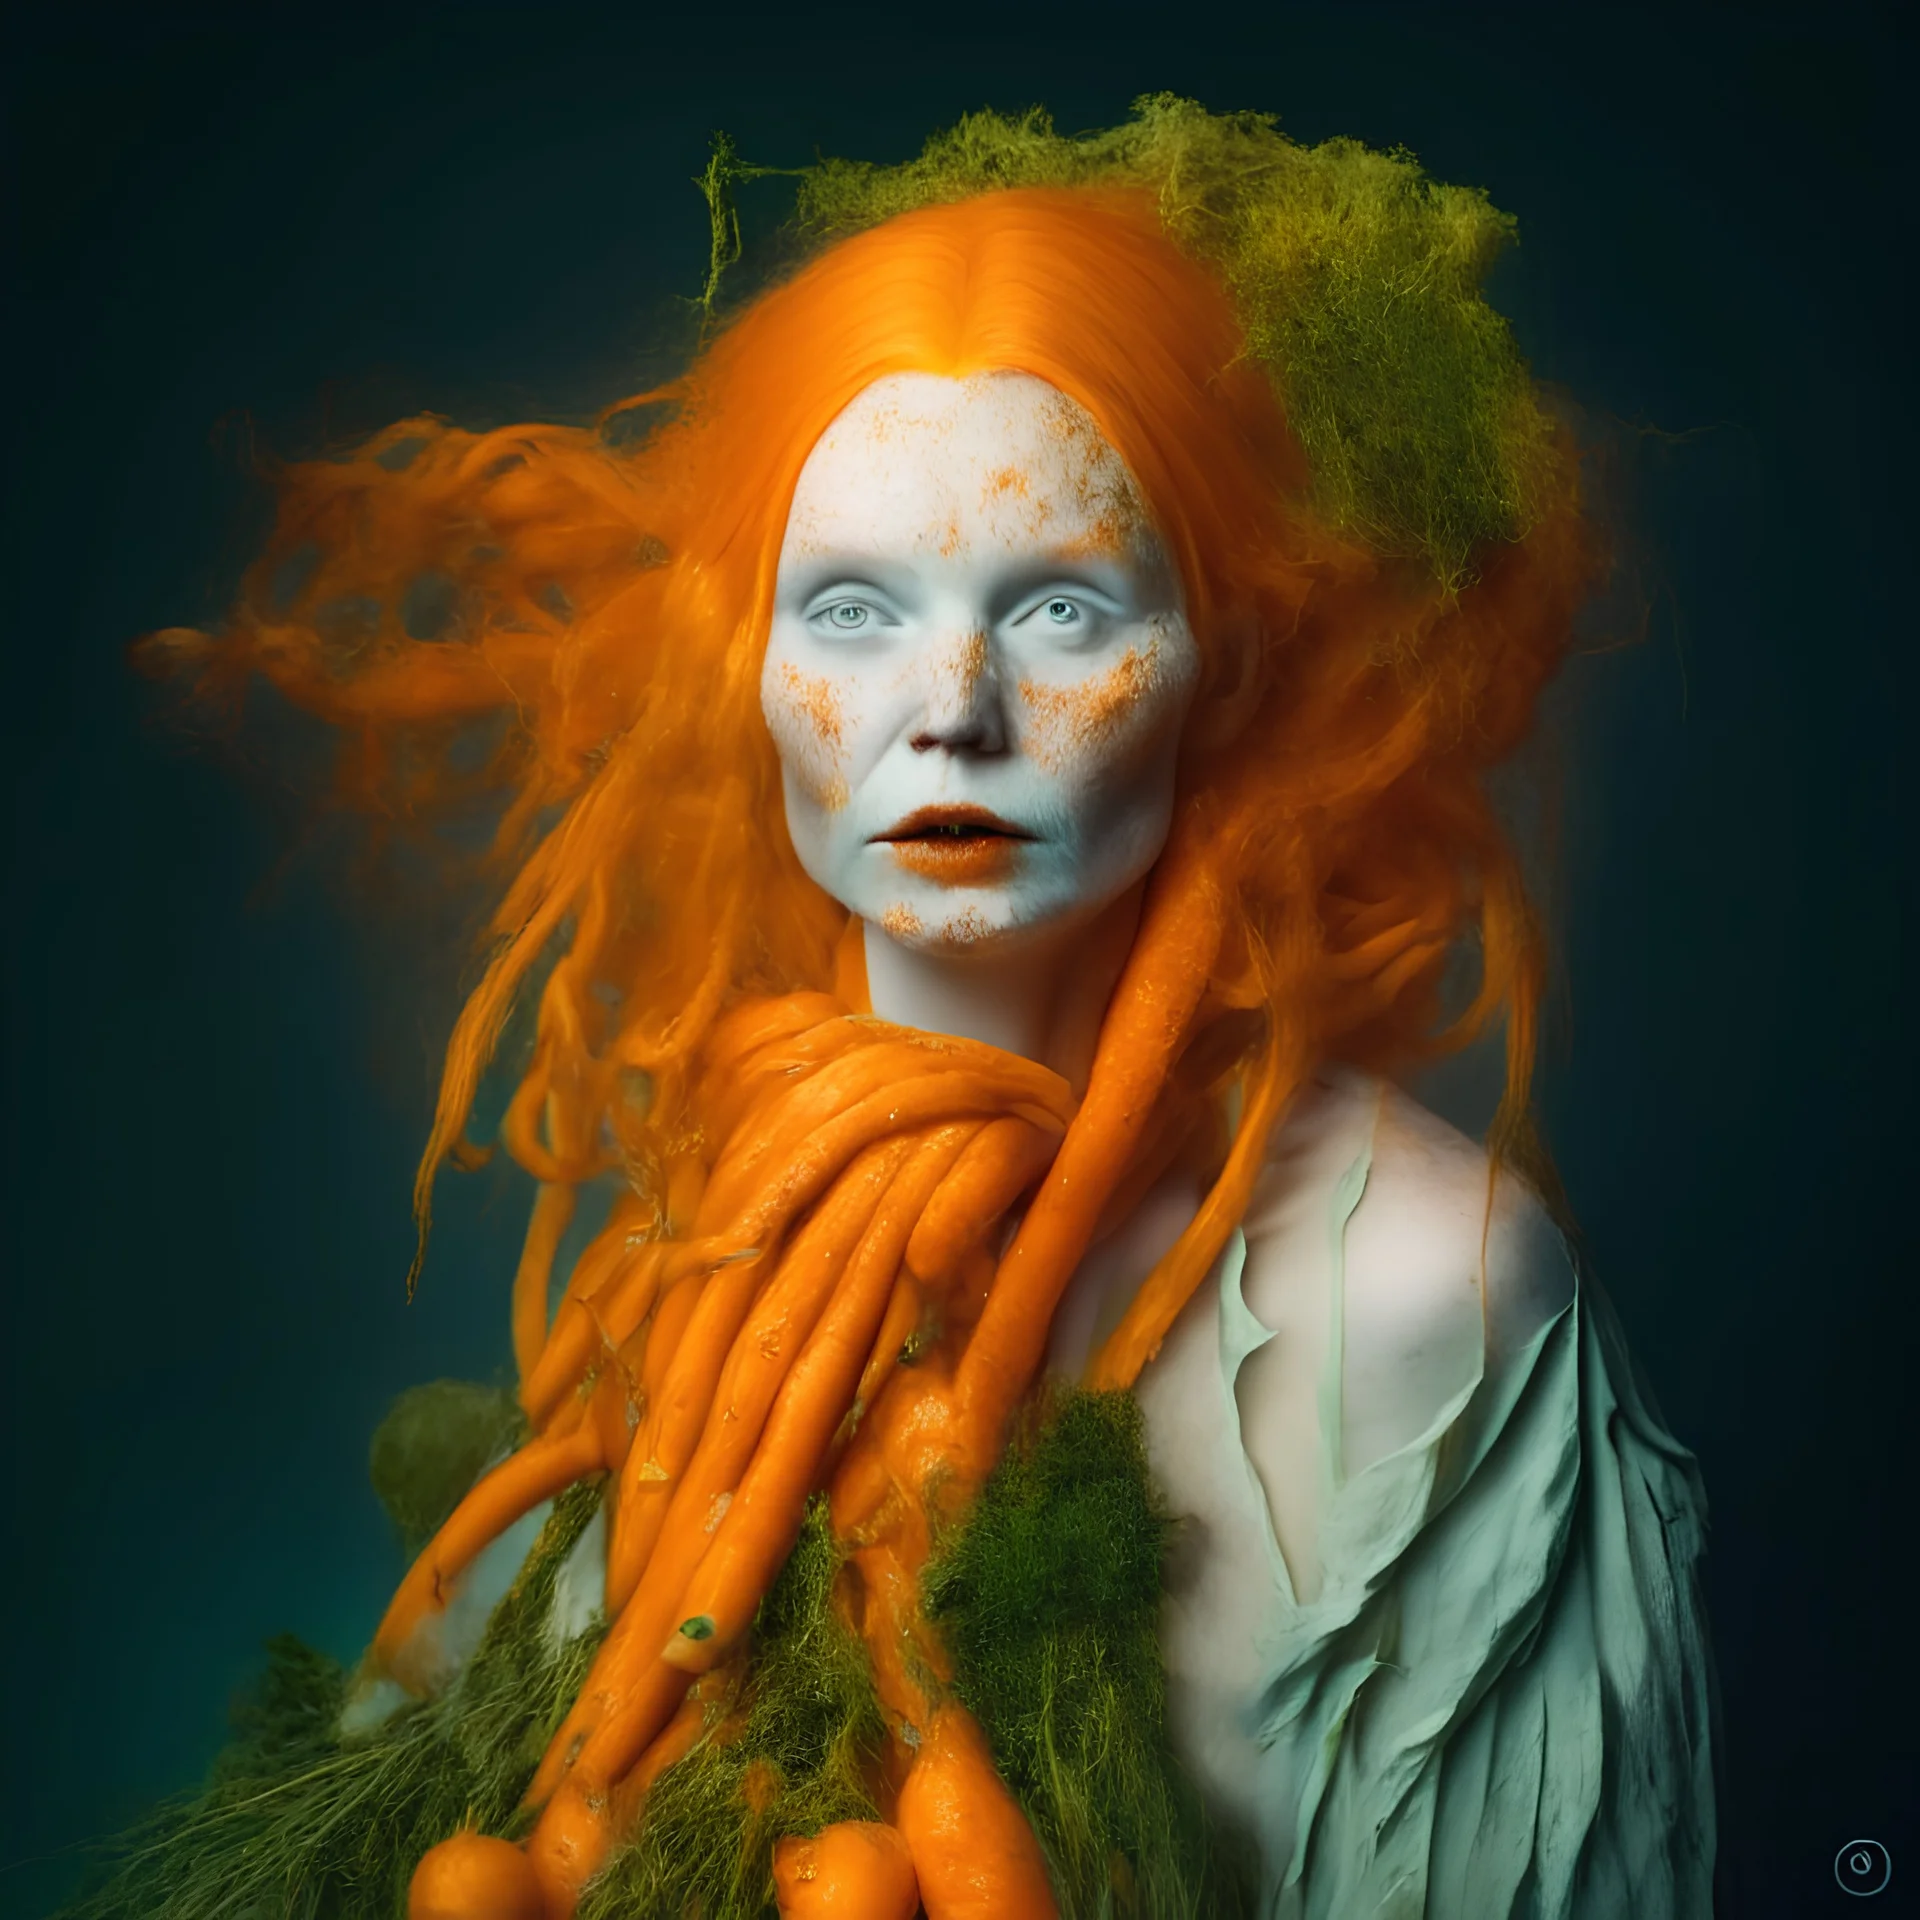 Undressed Pale old witch portrait, orange hair made of carrots and other vegetables, mold skin, style - professional_studio light